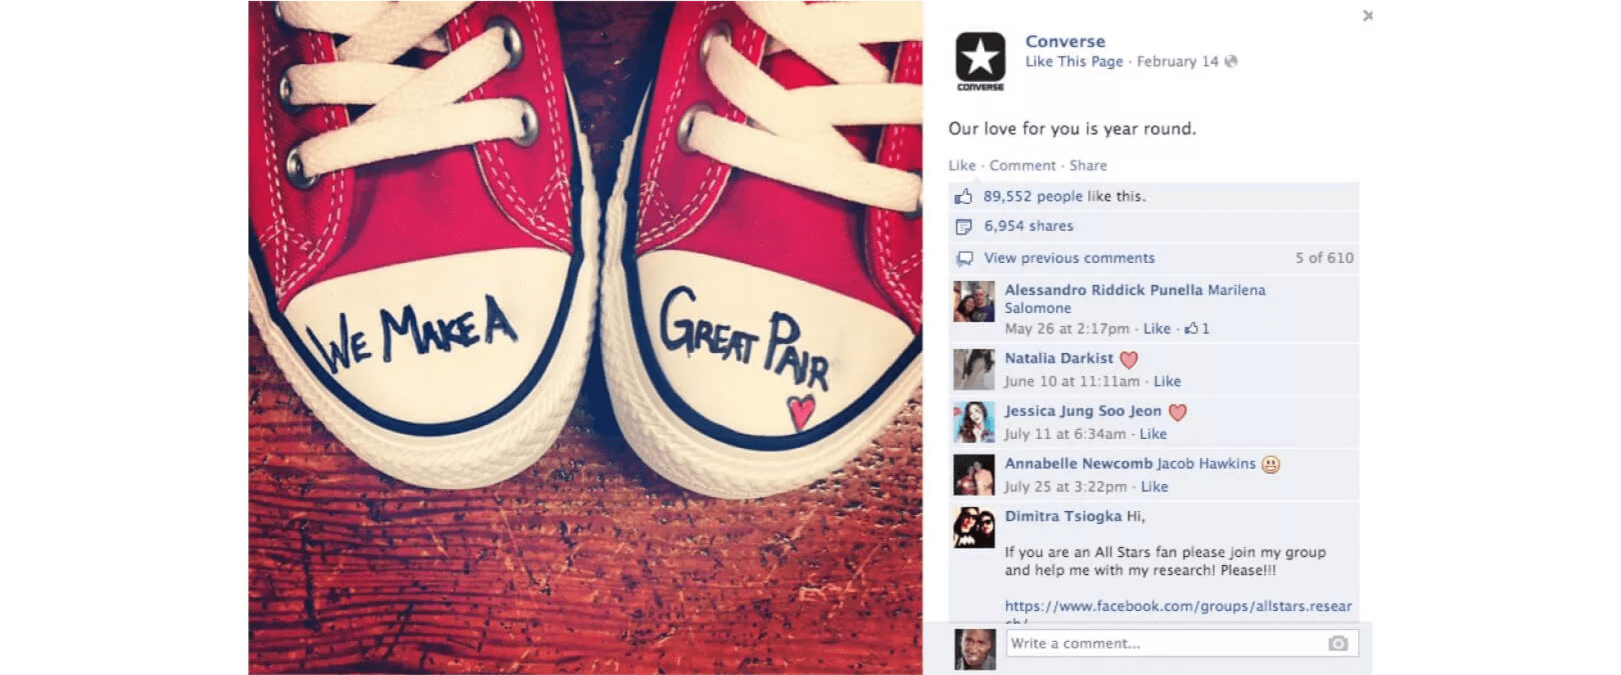 Viral Facebook post by Converse featuring a pair of red shoes with 'We Make A Great Pair' written on them, symbolizing customer appreciation and emotional connection.